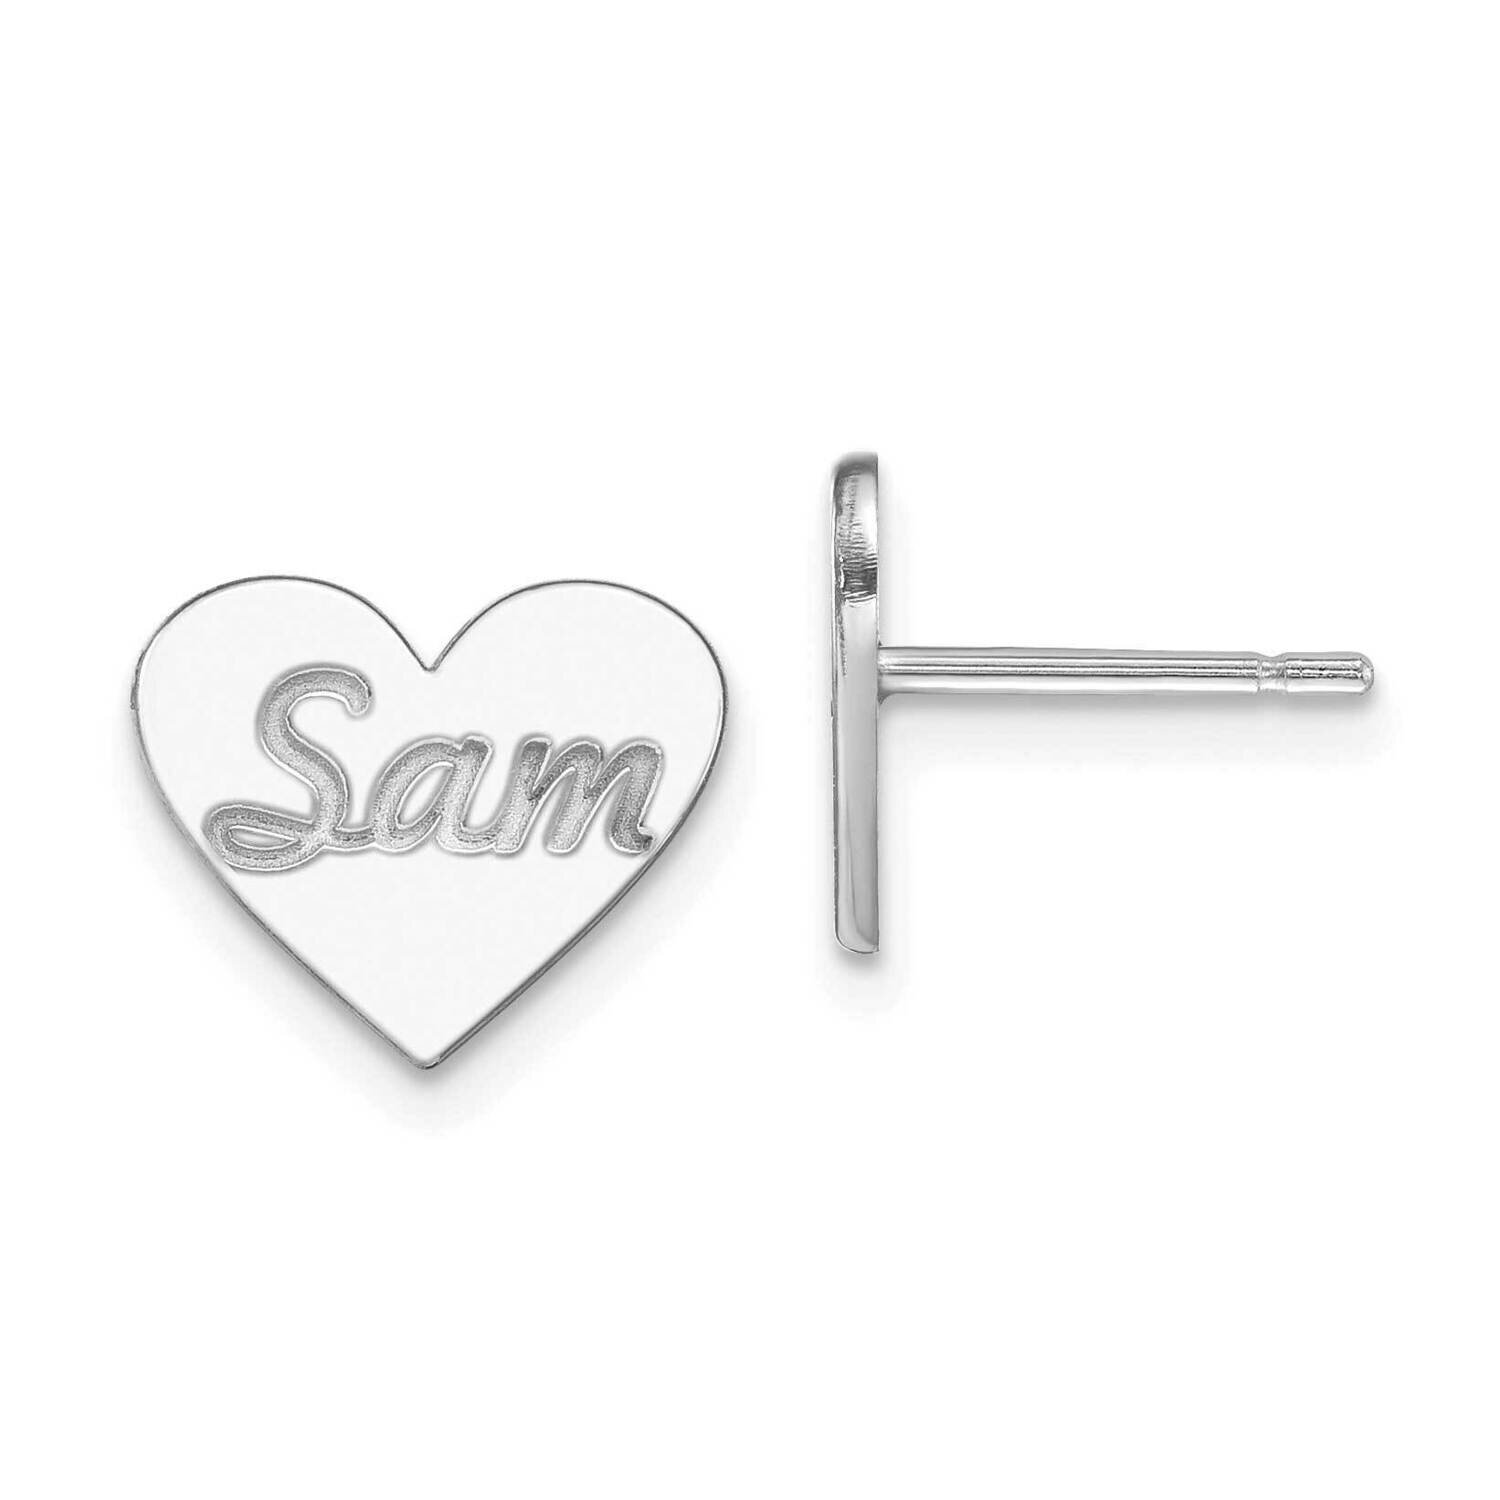 Personalized Heart Post Earrings 14k White Gold Small XNE75W